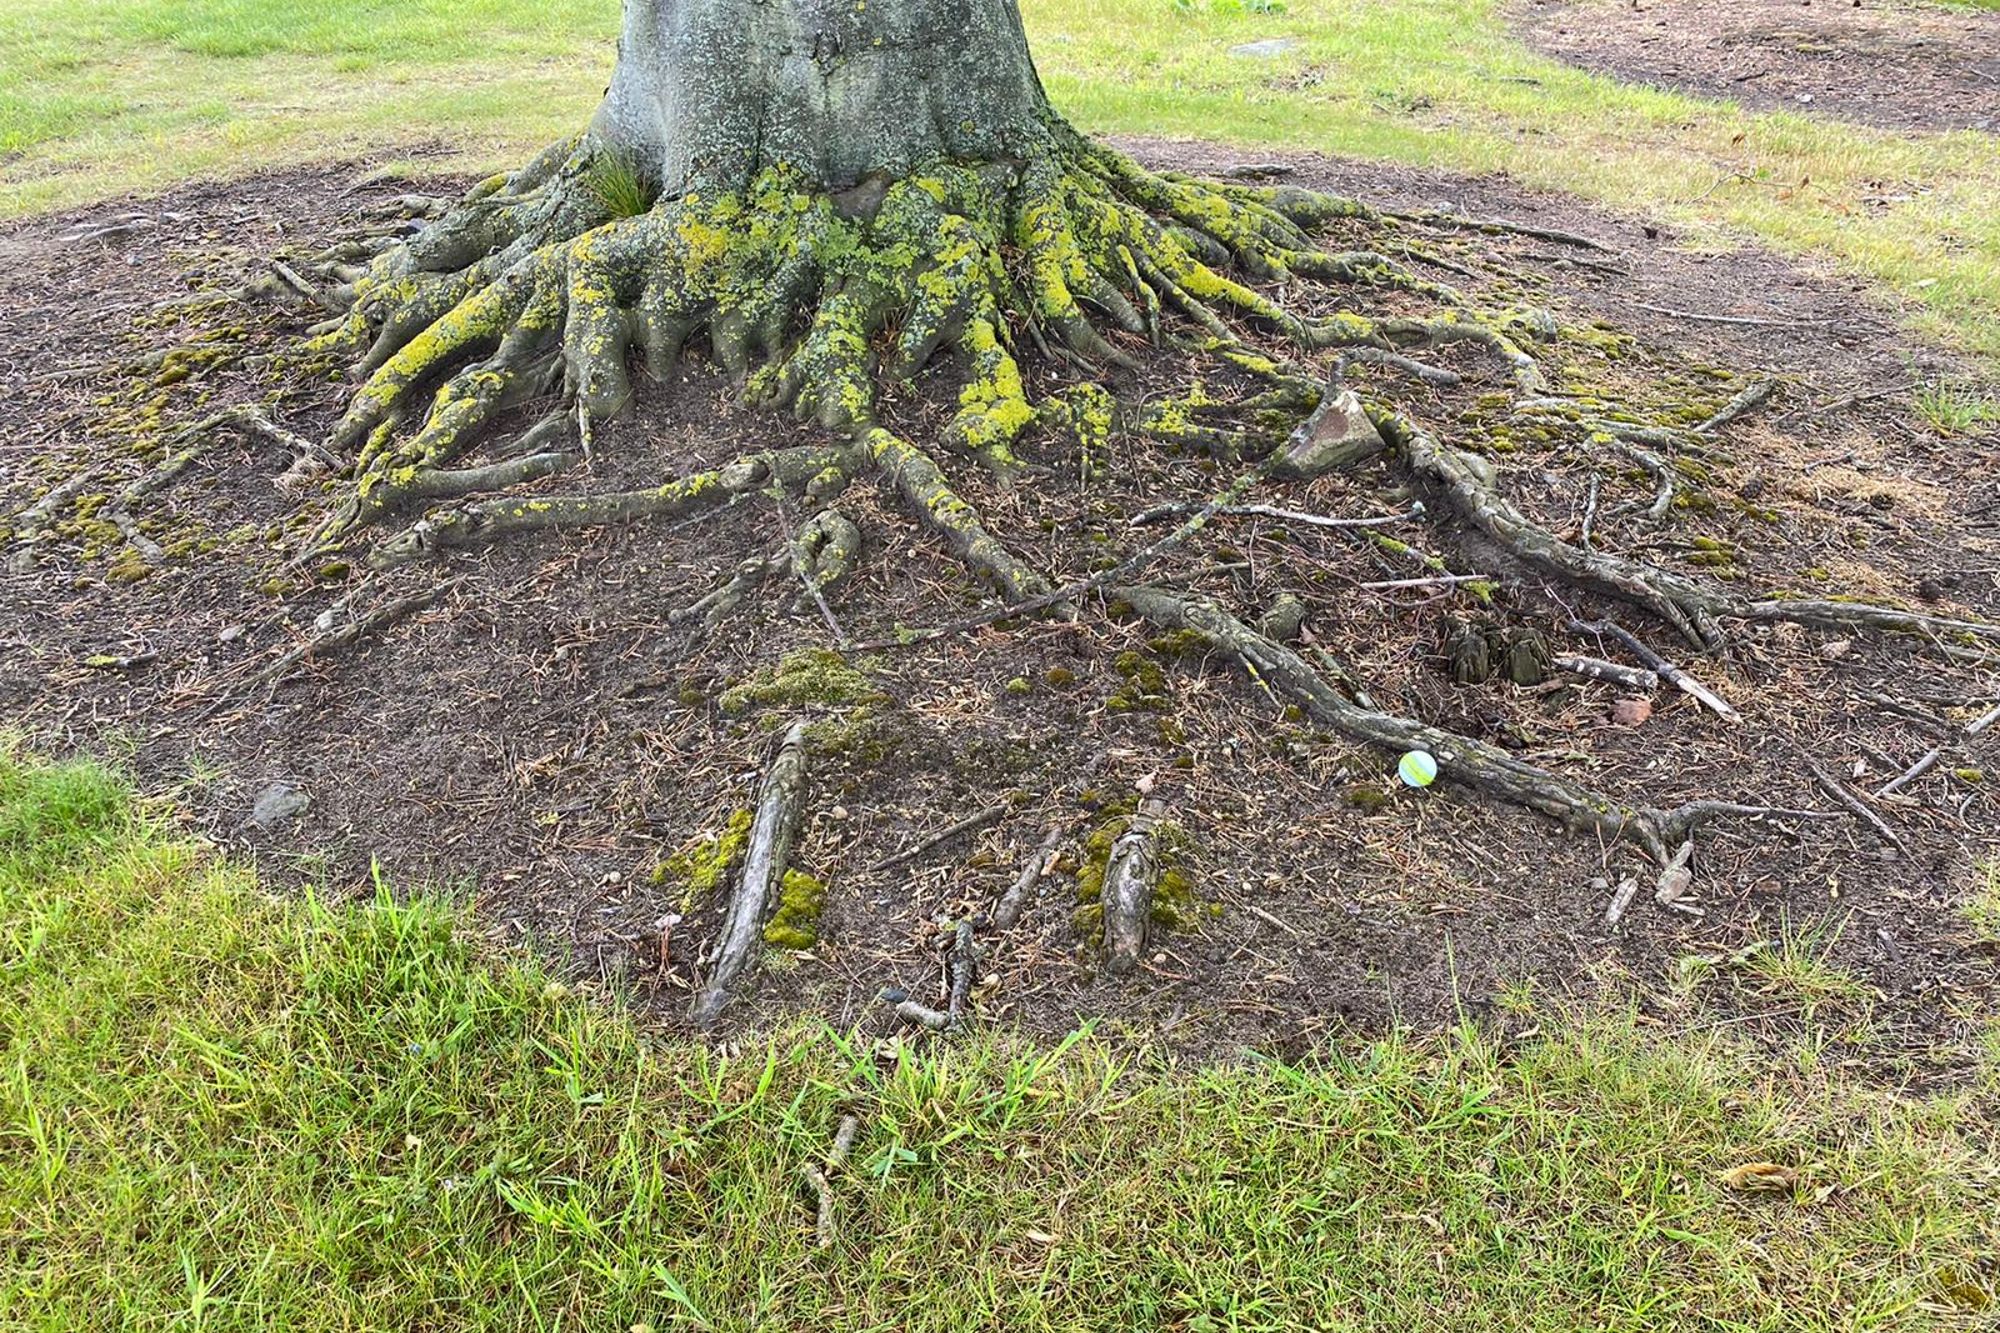 Relief from tree roots in golf: Is it allowed? Here's what the rules say